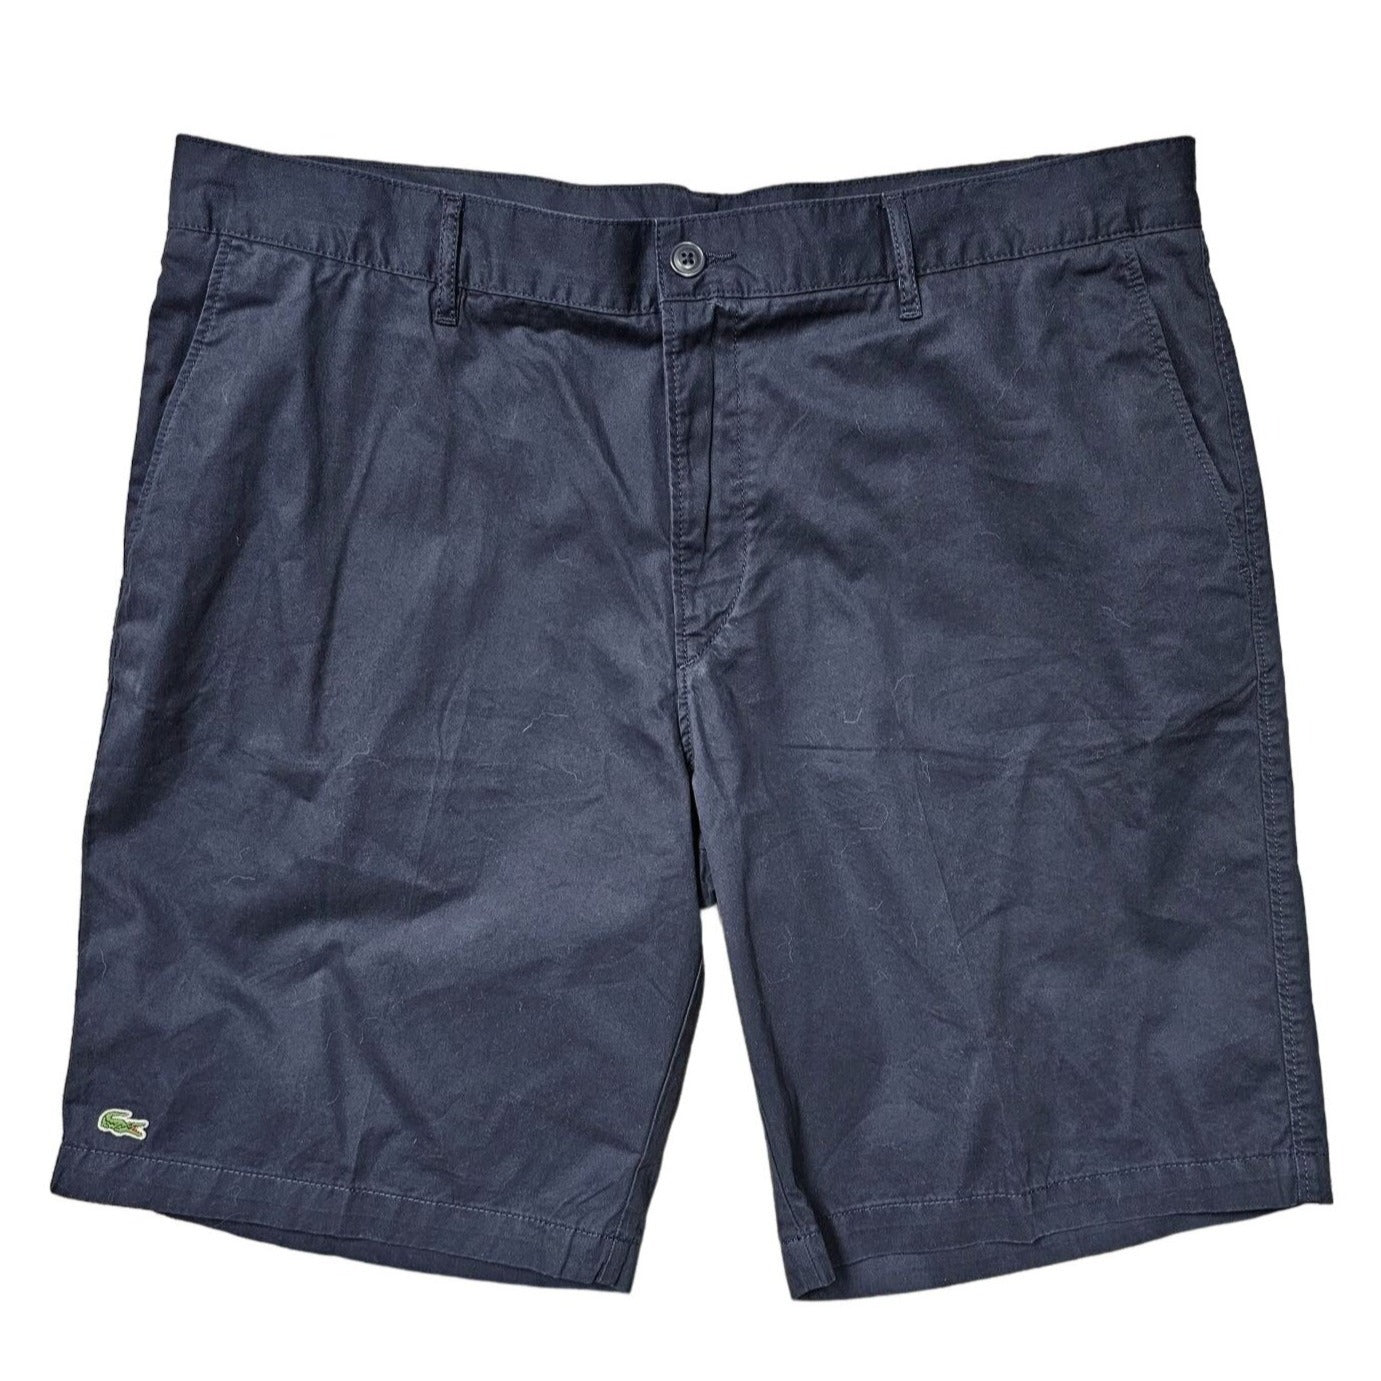 Lacoste Dark Navy Blue Chino Casual Regular Fit Men's Shorts, Size 40